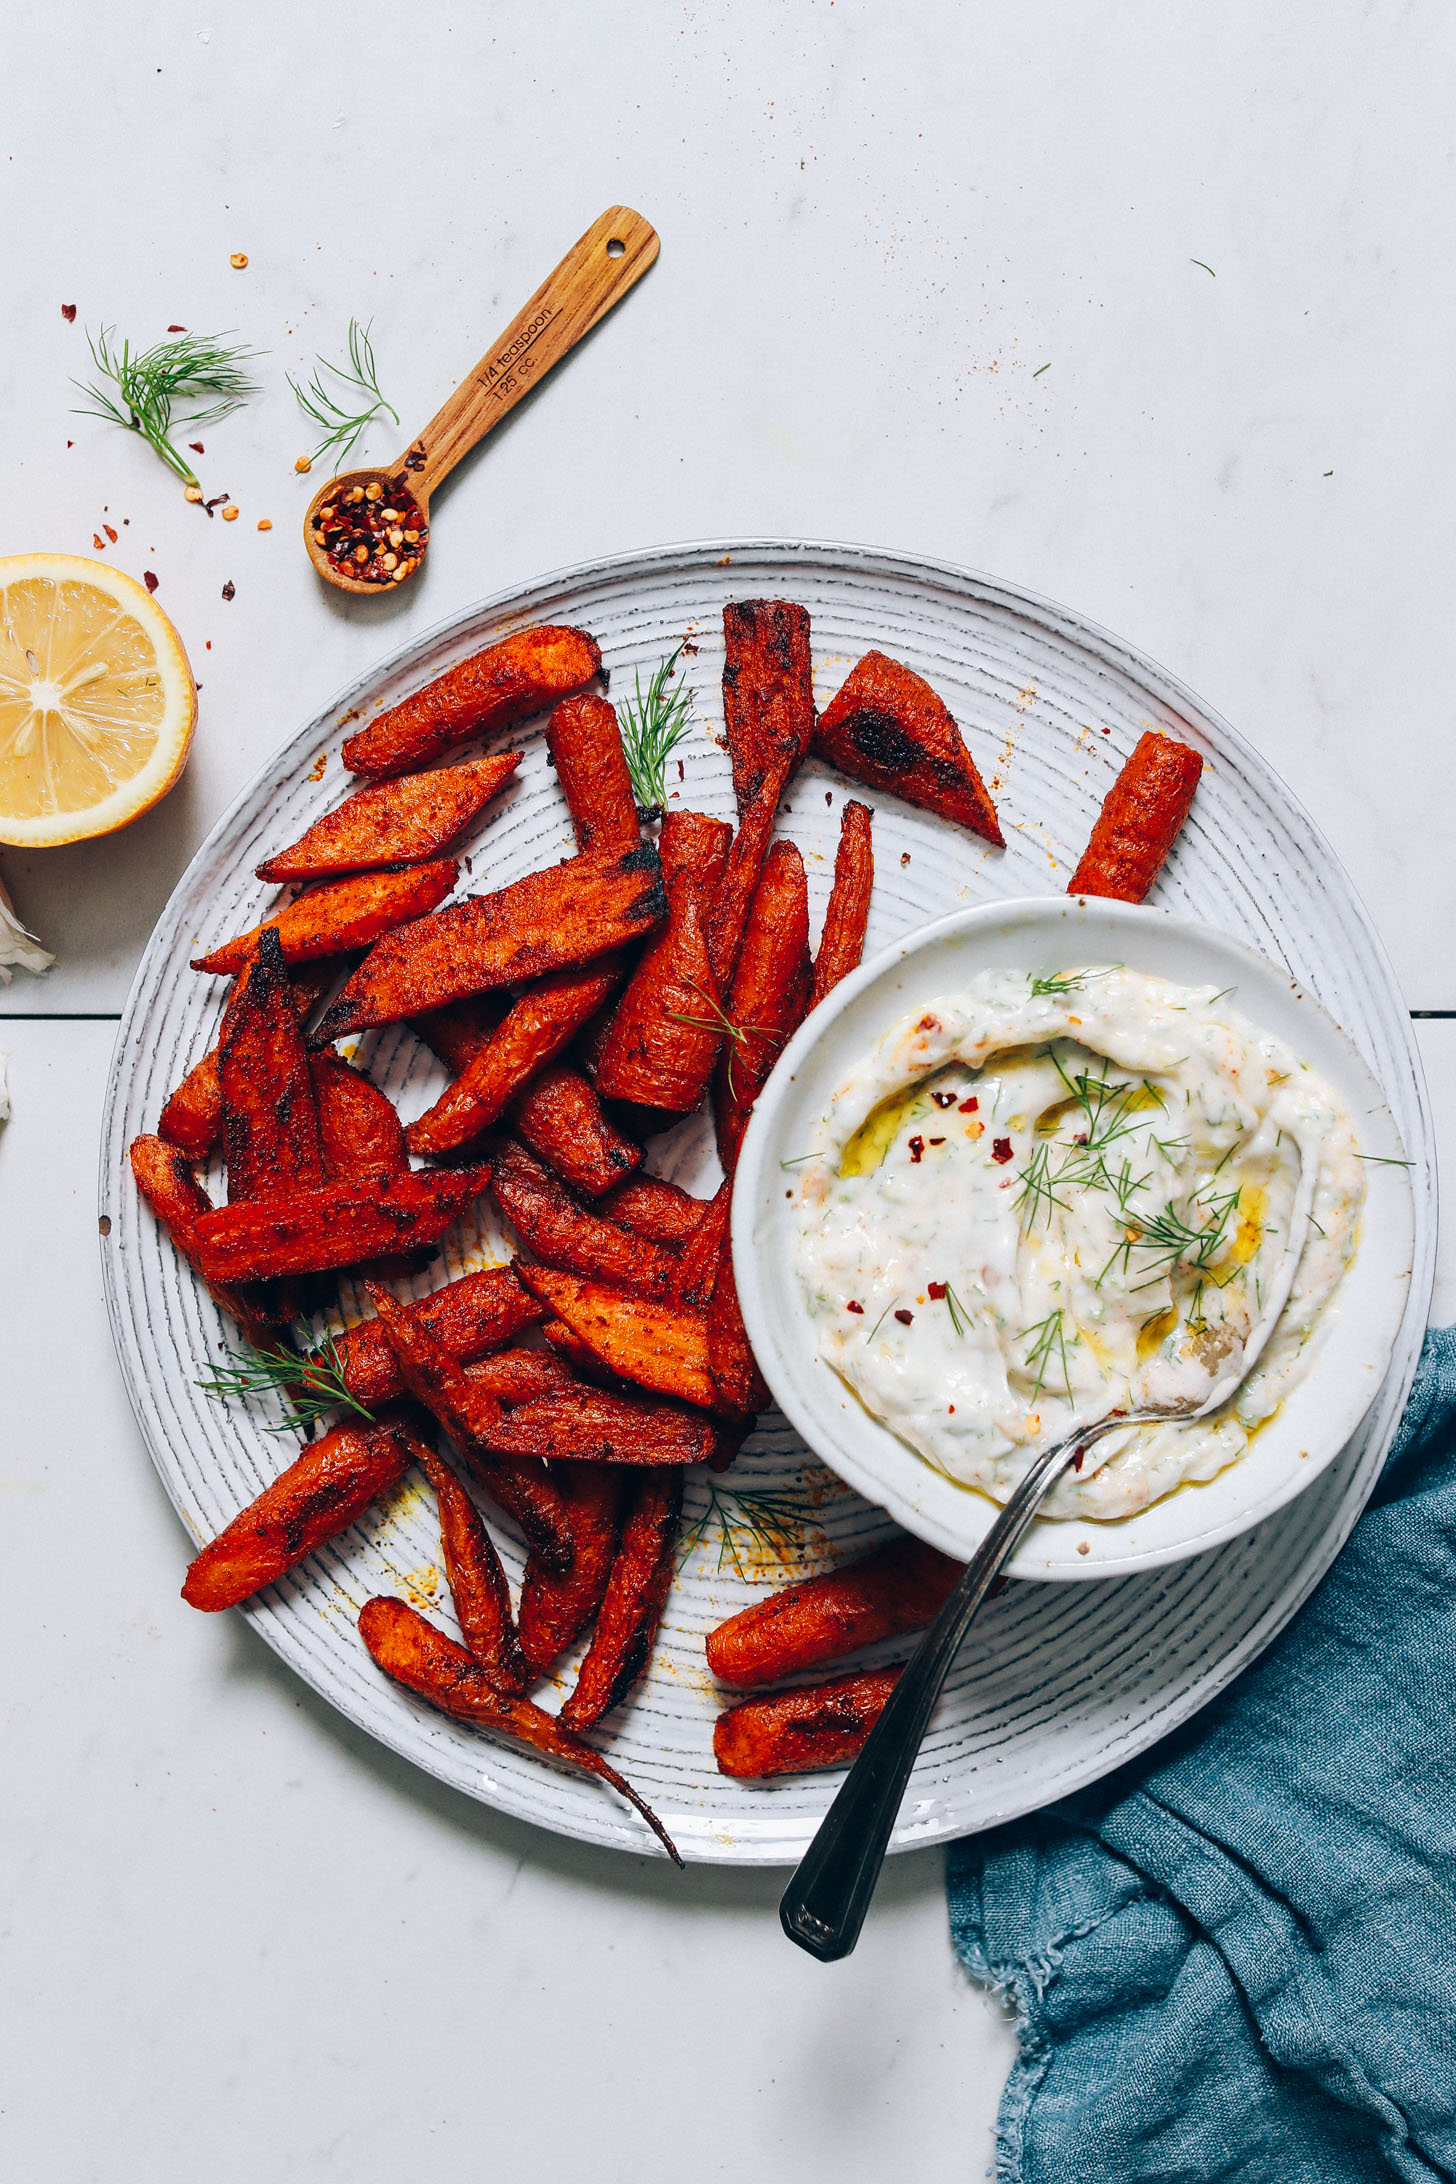 Perfectly roasted carrots coated in Moroccan spices beside a bowl of Dairy-Free Yogurt Dip